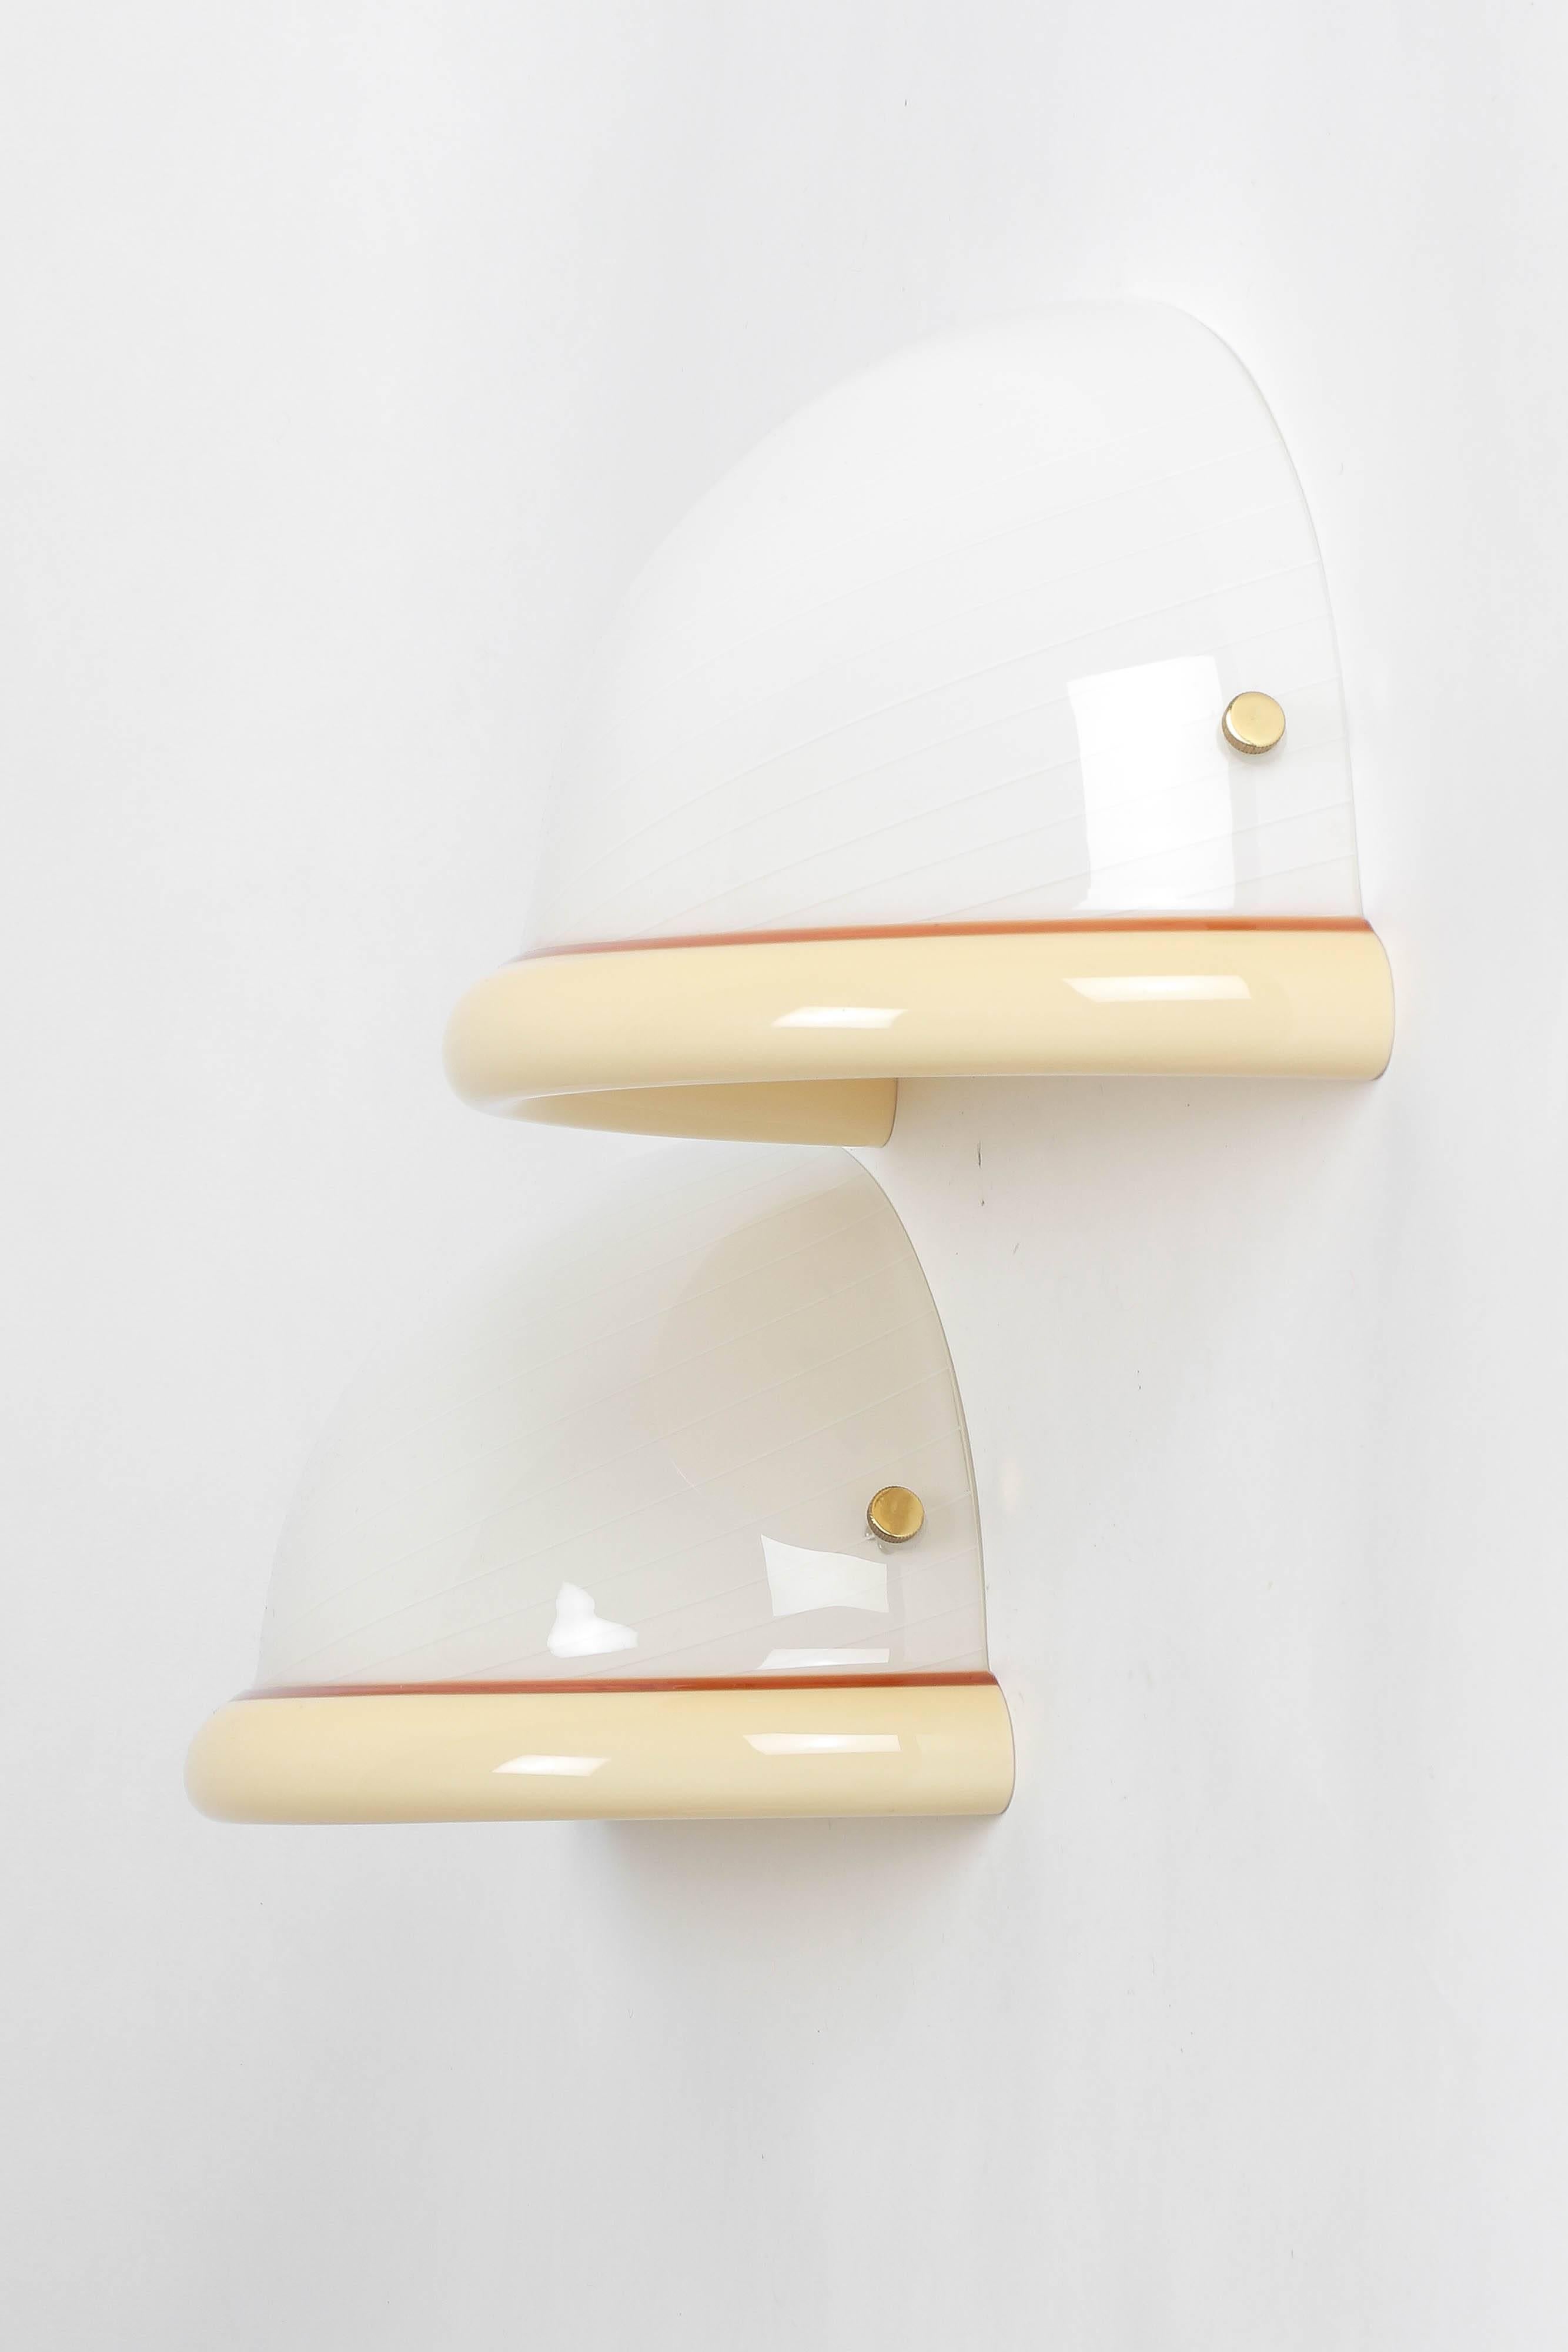 Wonderful pair of high-end Murano glass sconces, handmade Vetri Murano, designed and manufactured by Renato Toso in Italy in the late 1960s. Made of very thick mouth blown glass in opaque white with translucent stripes and a bent glass border in